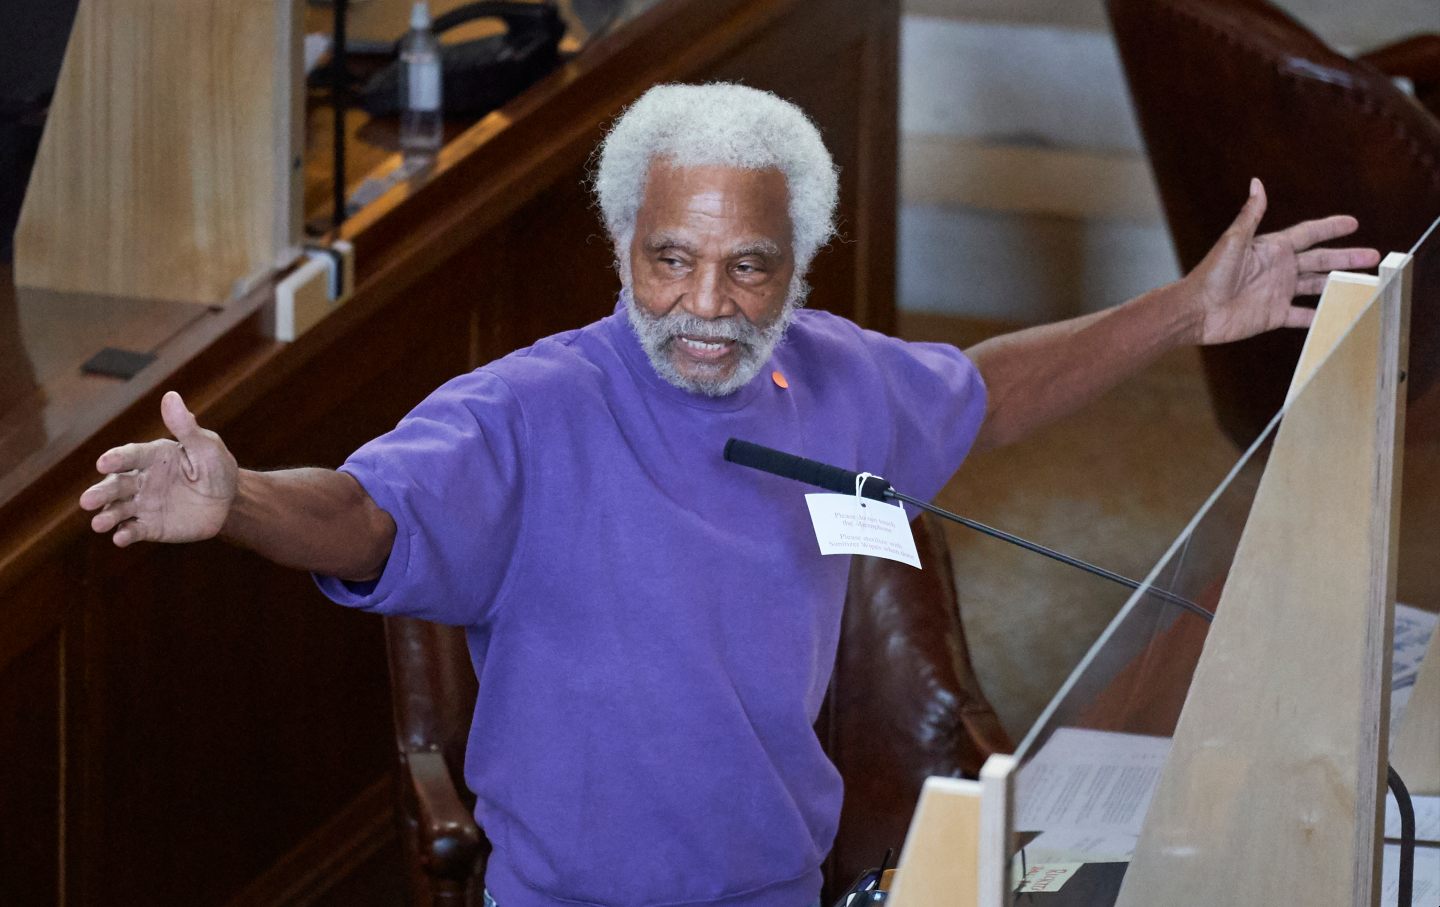 Ernie Chambers extends his hands while speaking in front of a microphone